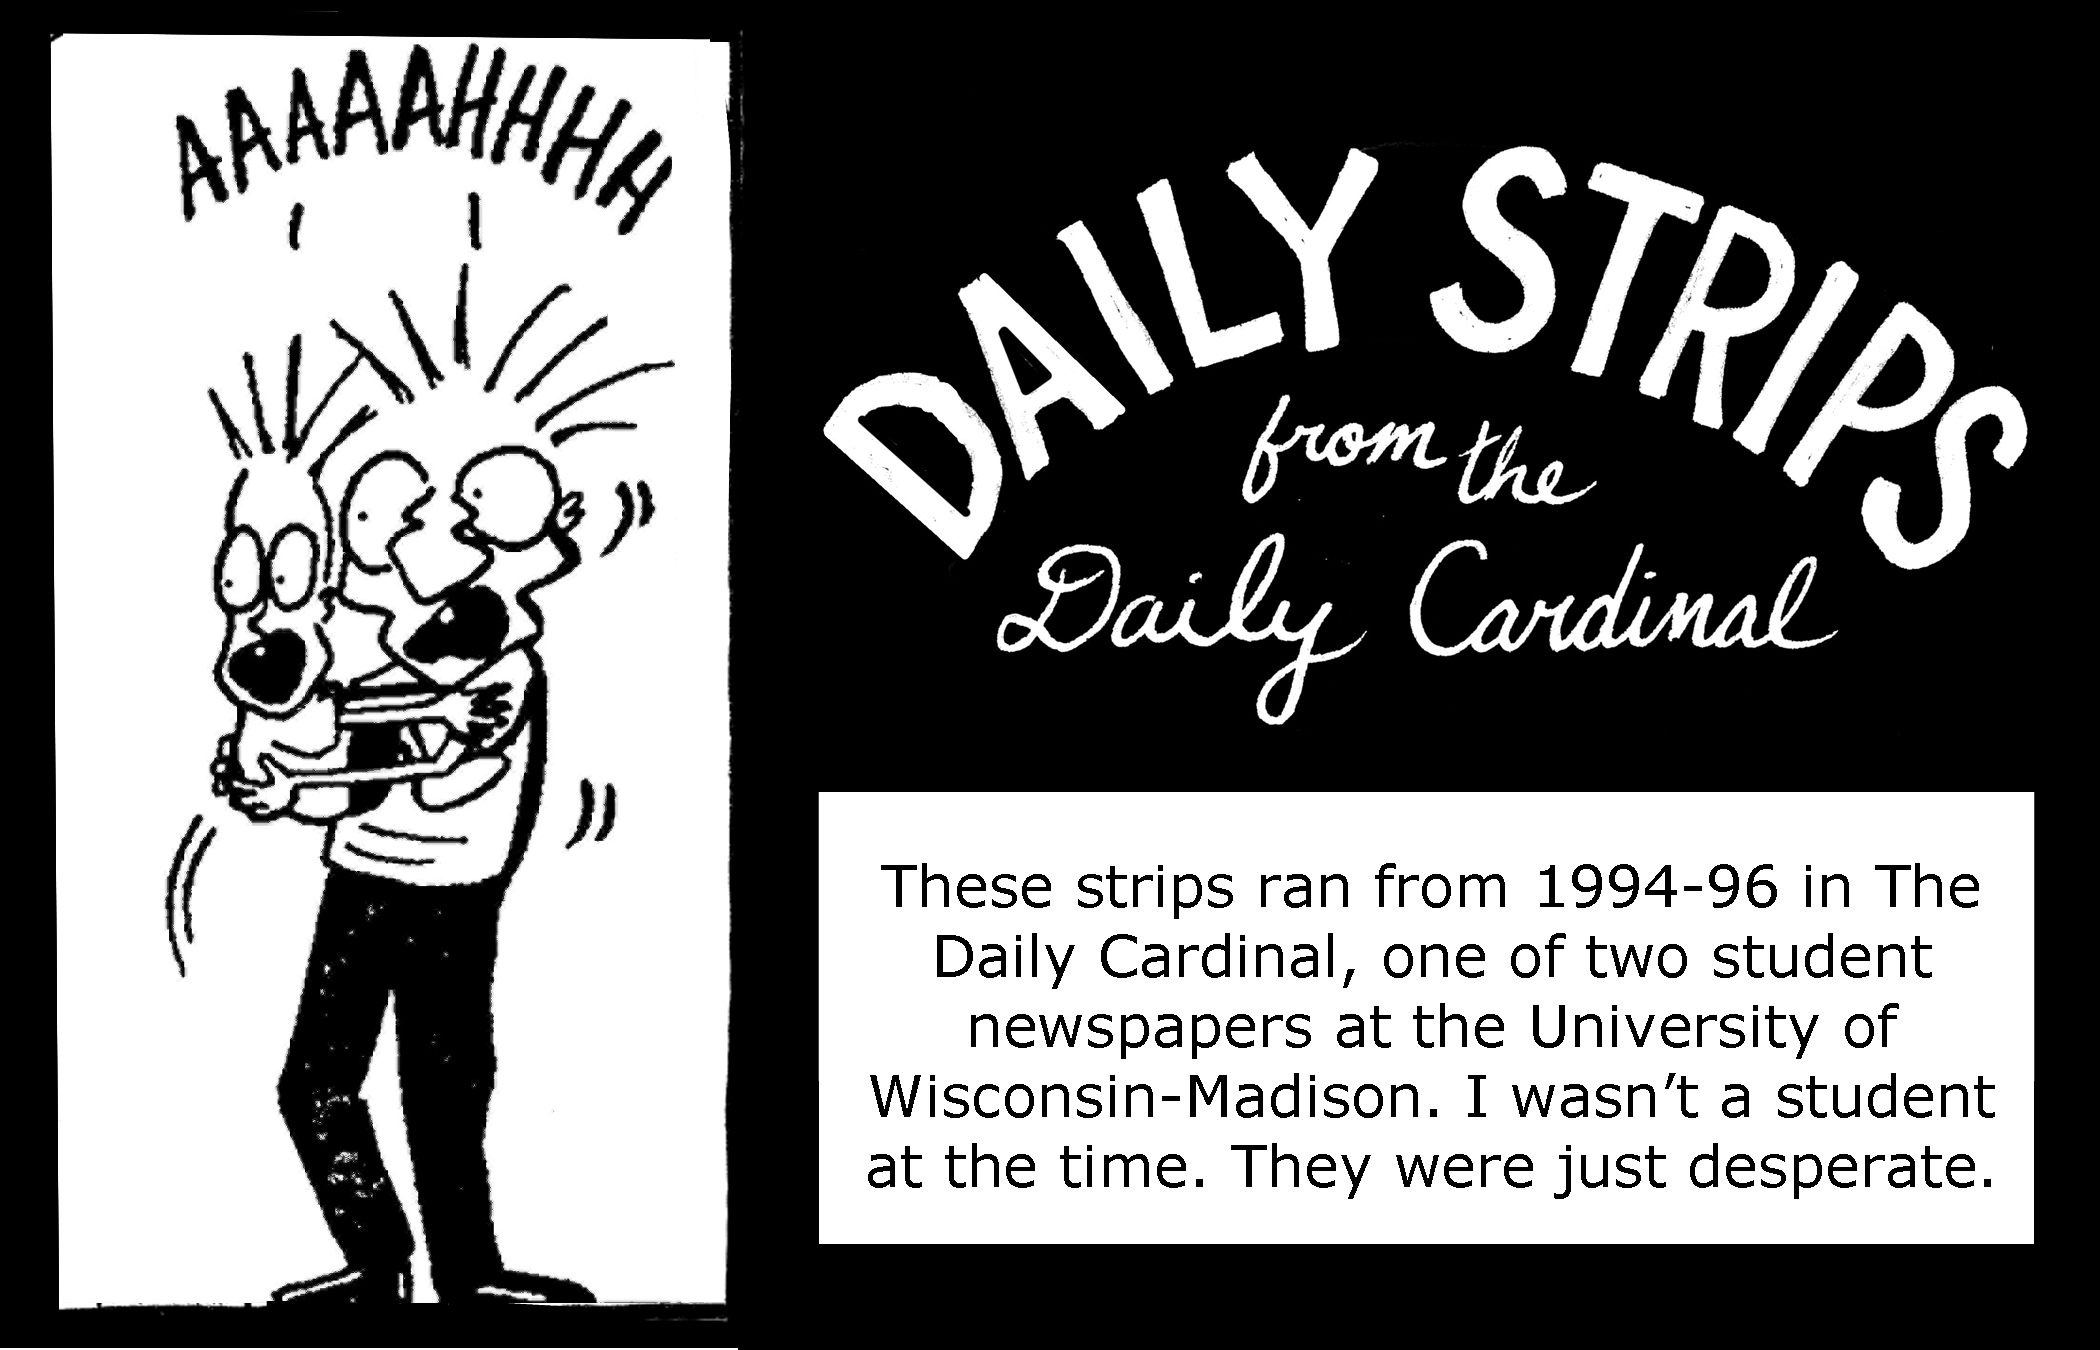 Daily Strips